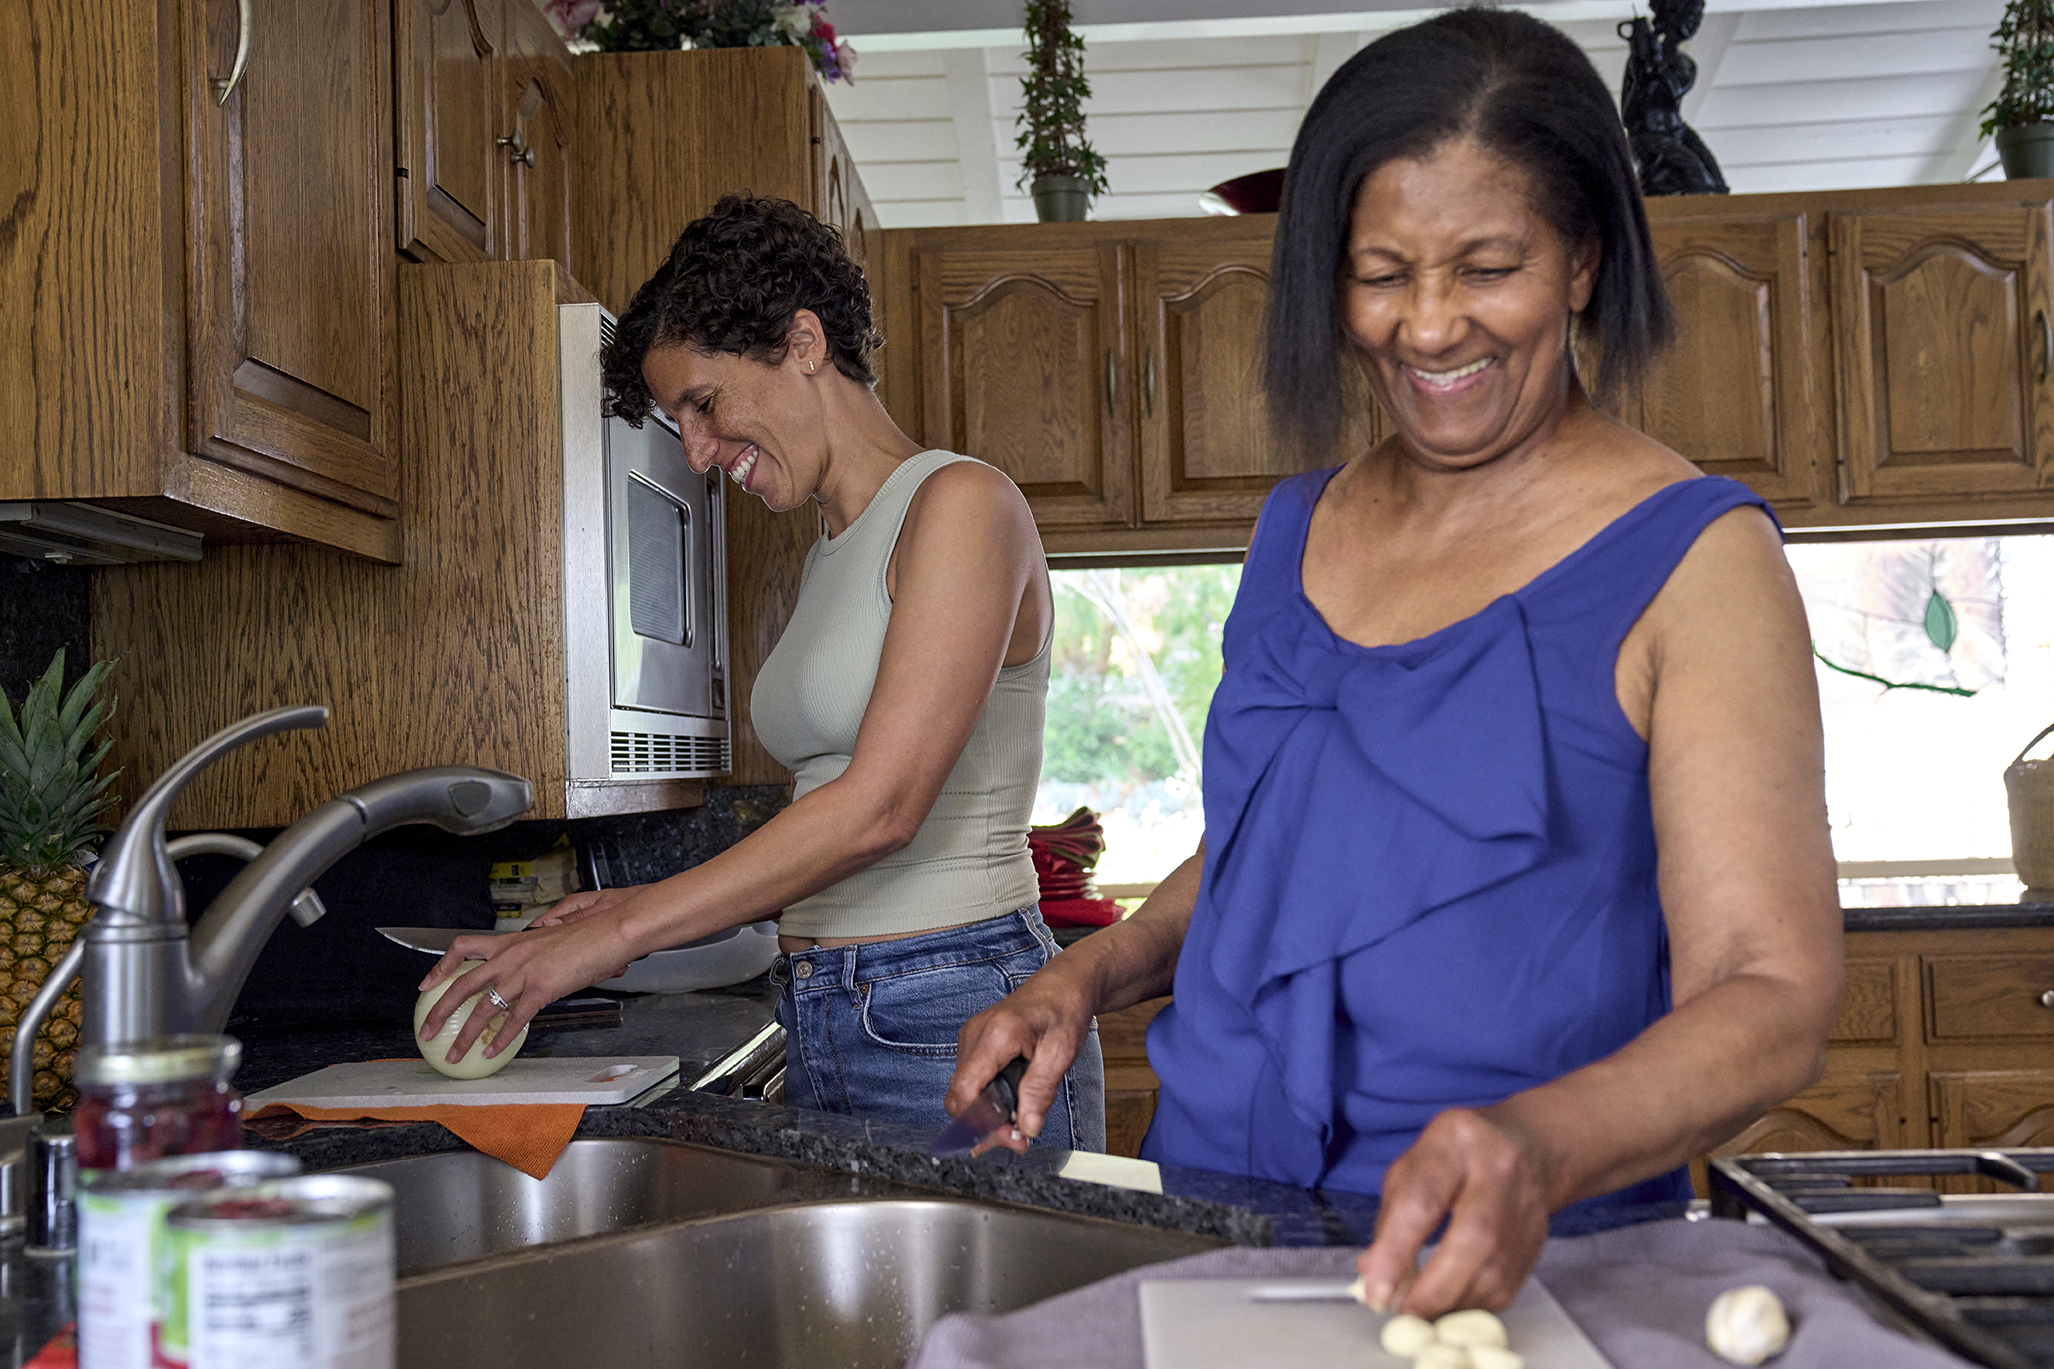 women cooking and smiling